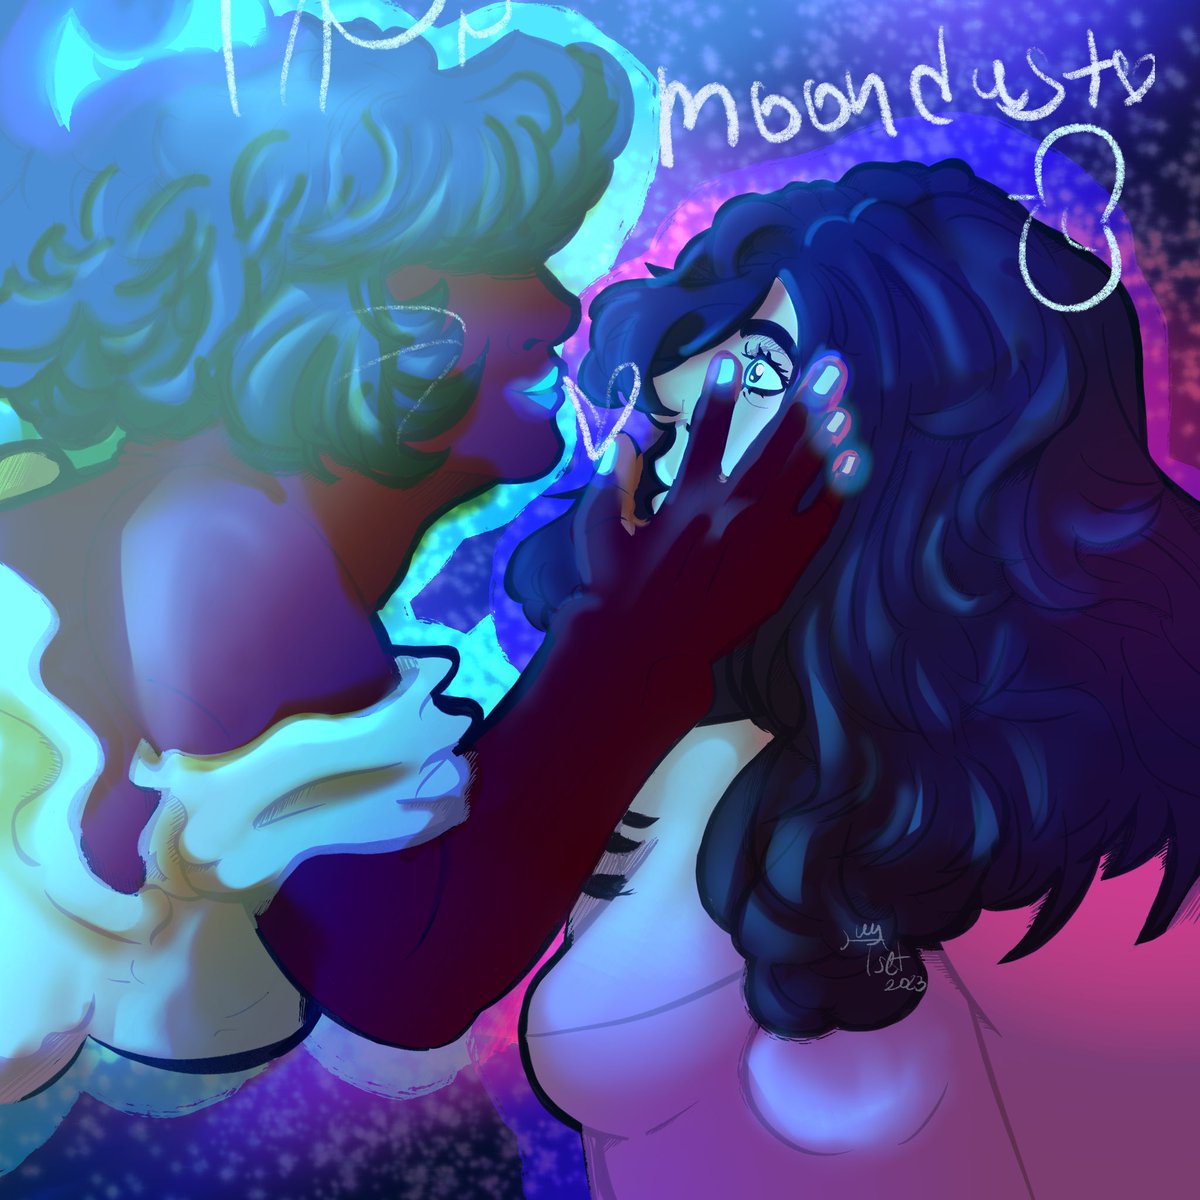 MOONDUST NATION RISE!
(I hope you’ll like it, cuz I did it ‘till 01:25 AM 🫠 and I can’t see my mistakes in art rn)
#moondustshipping #lmktwt